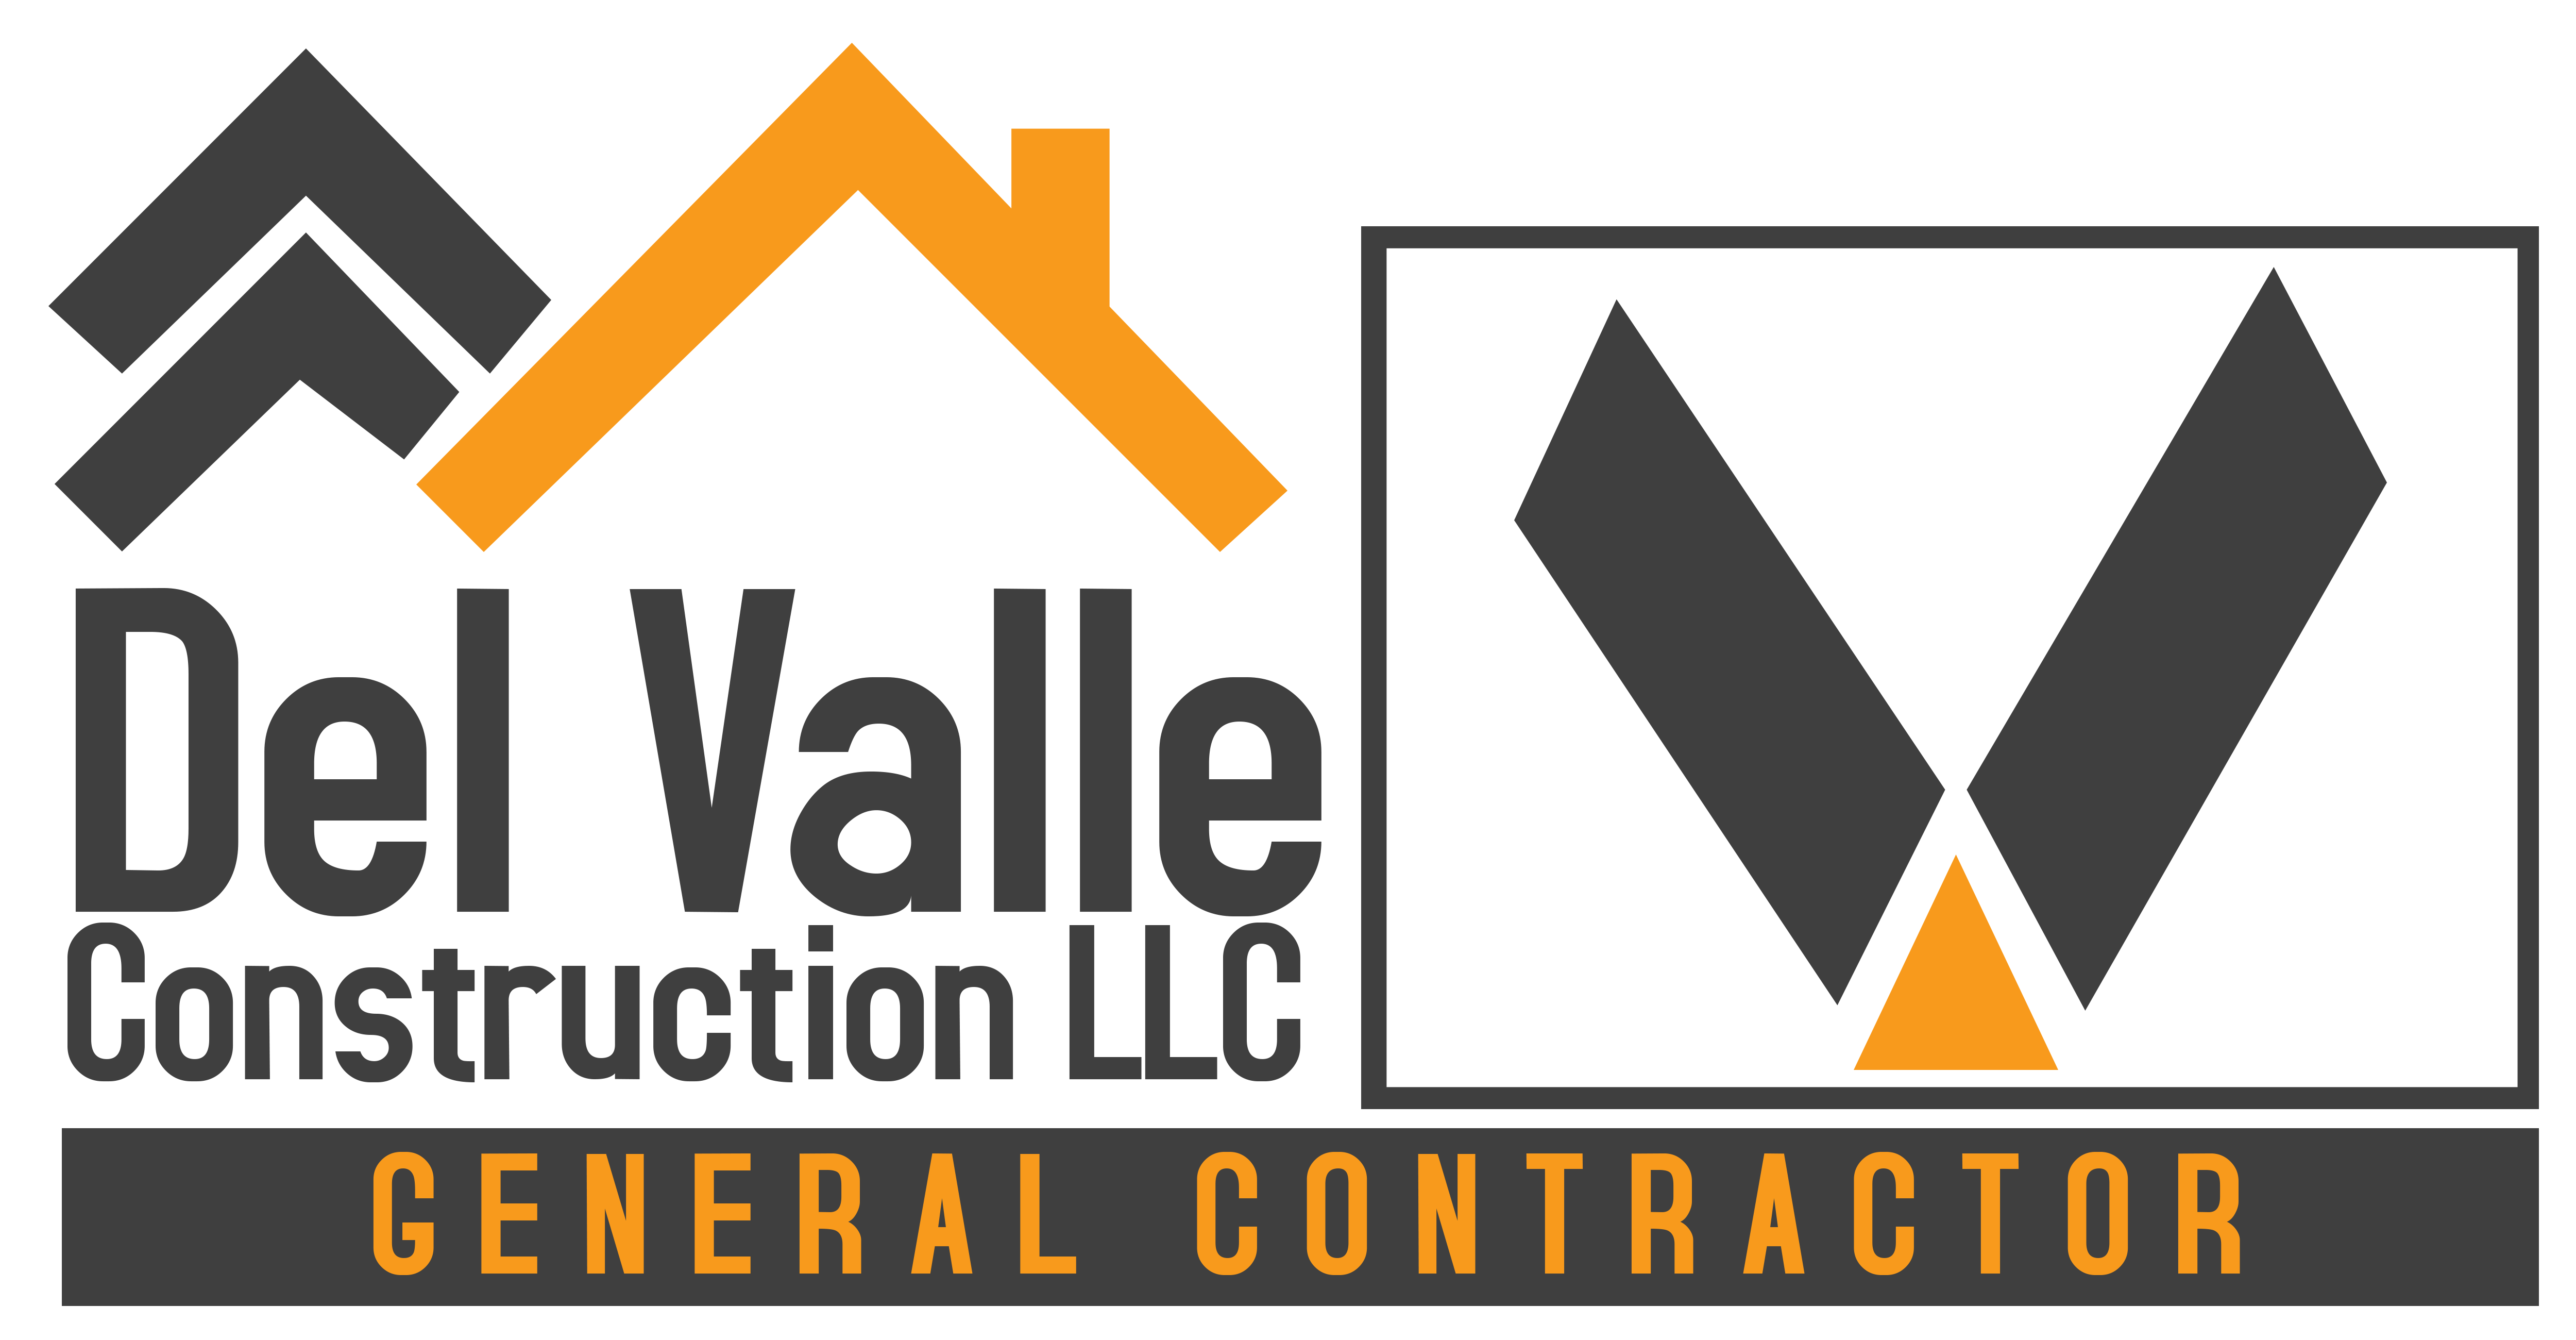 DEL VALLE CONSTRUCTION LLC | CONCRETE AND FRAMING SERVICES